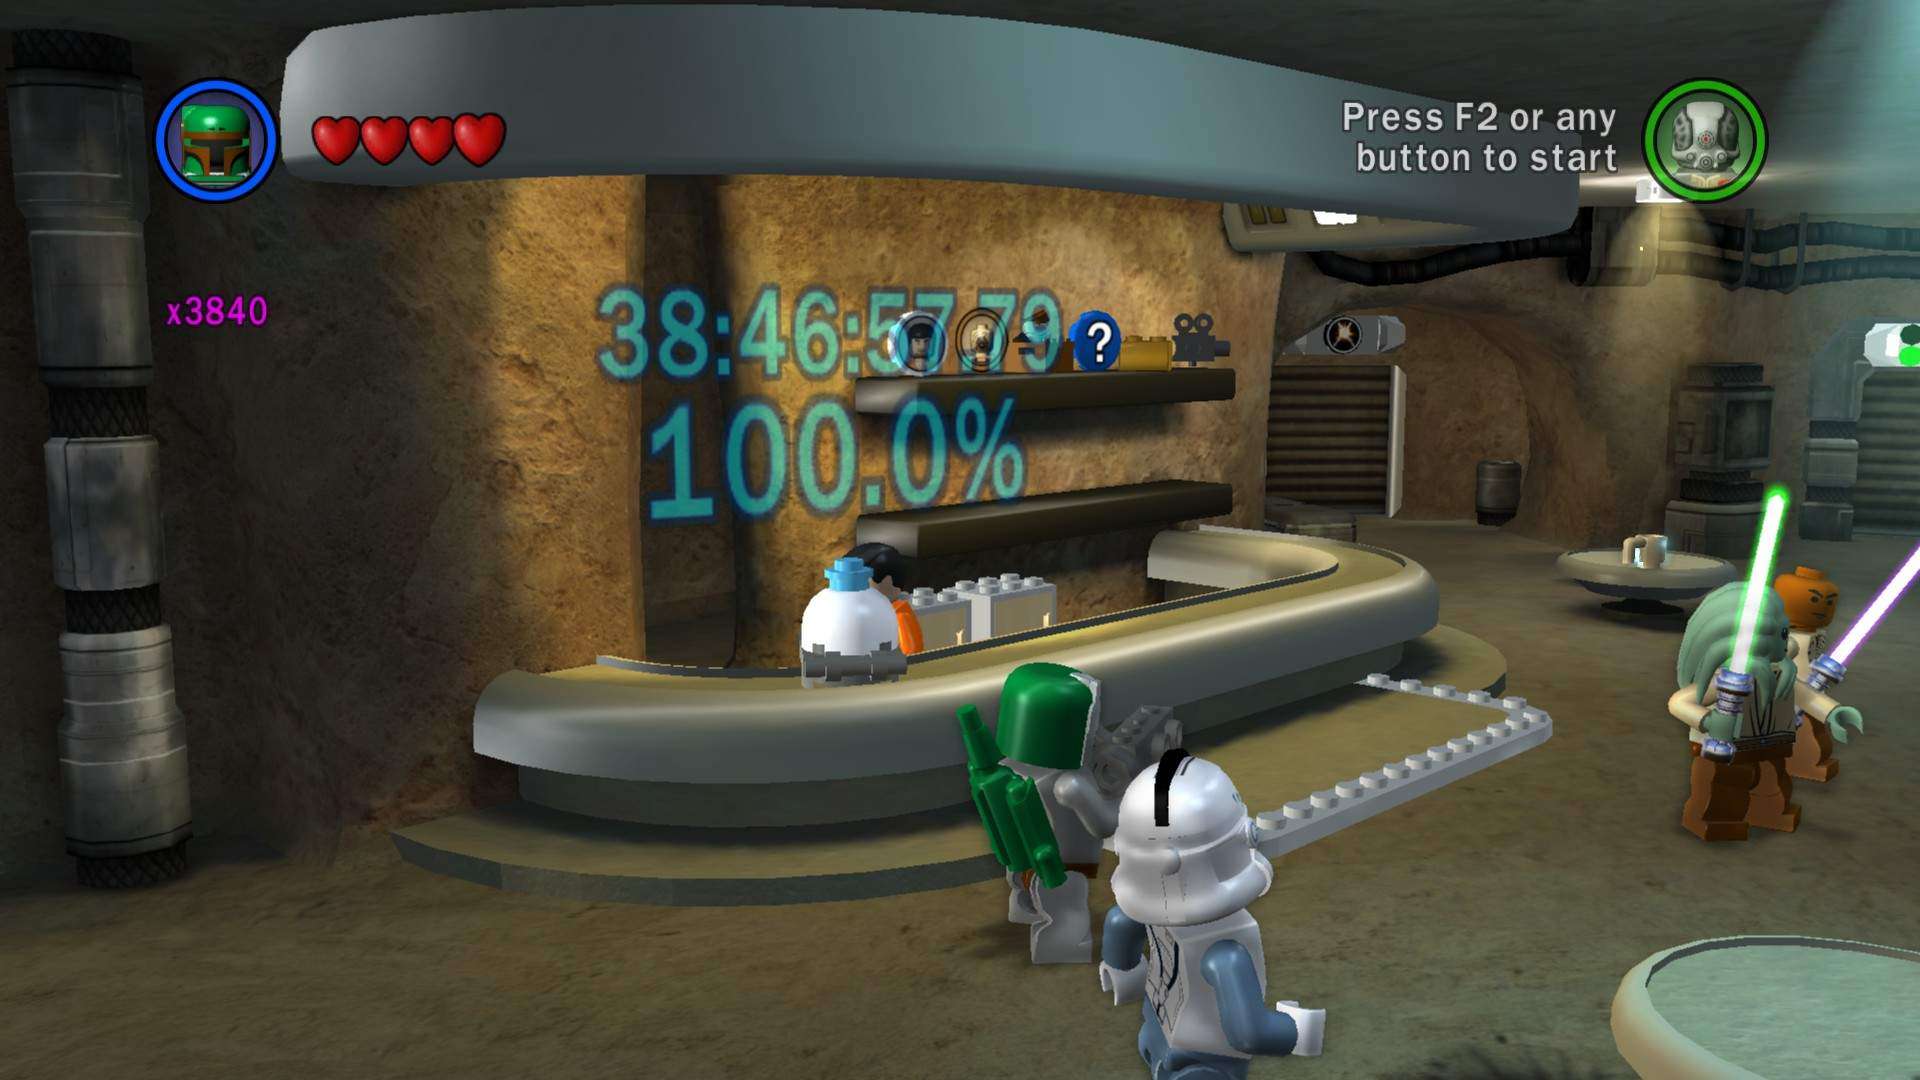 max out the stud counter in lego star wars tcs